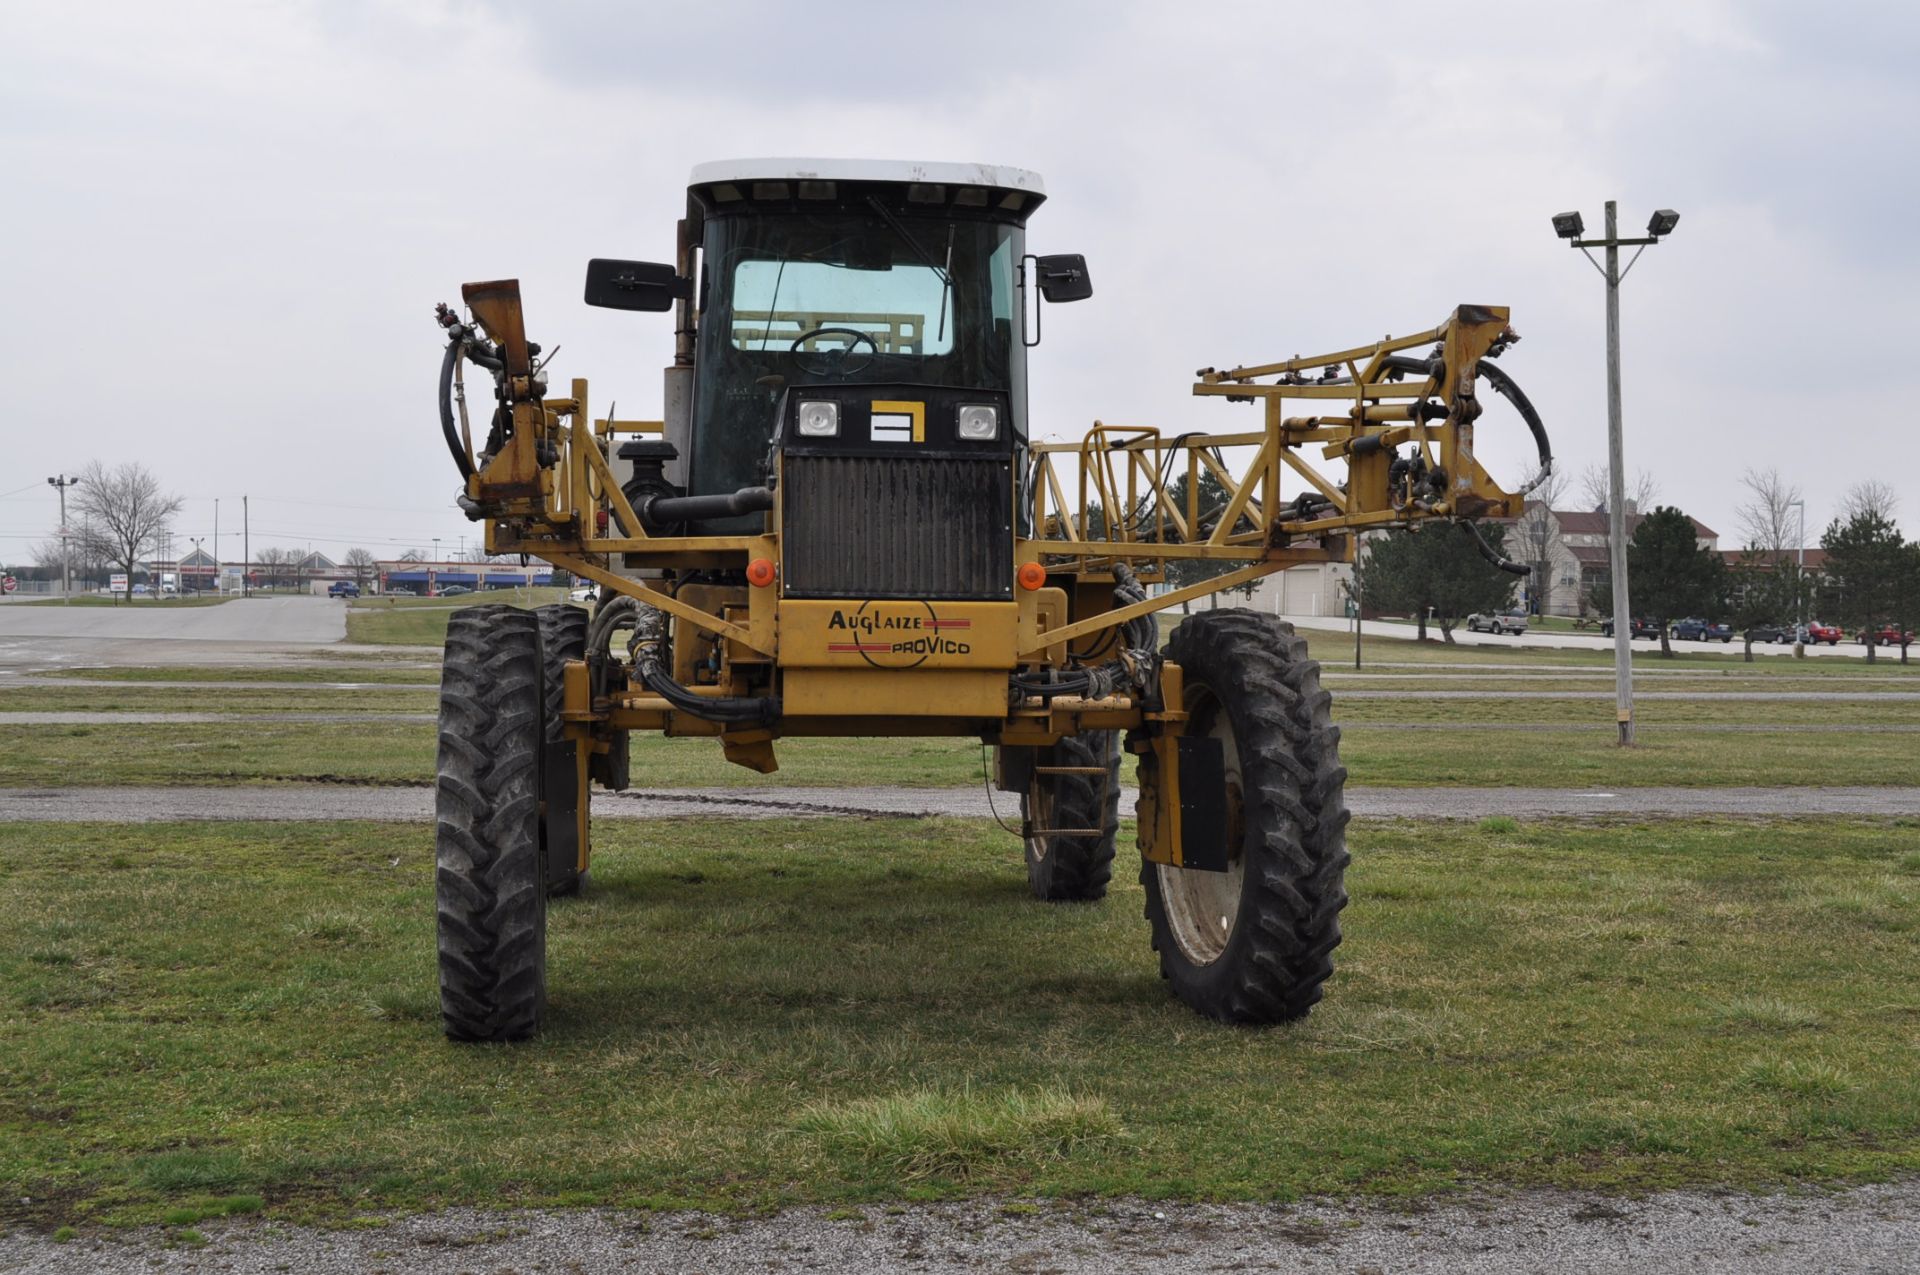 1996 Rogator 854 w/80’ booms, 800 gallon SS tank, 4748 hrs - Image 7 of 20